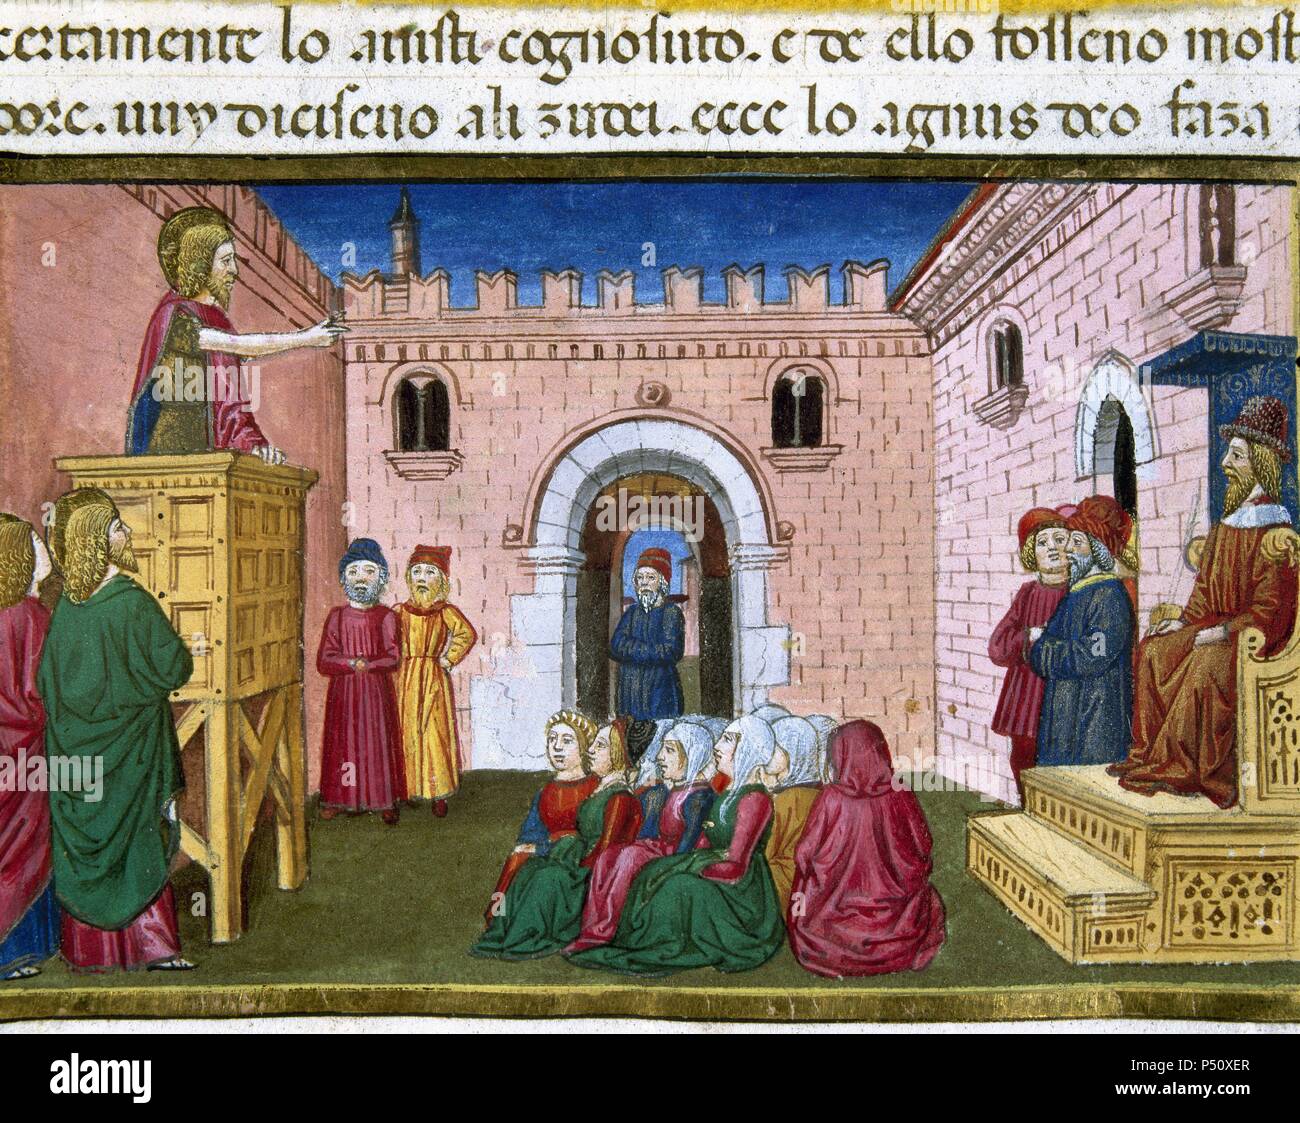 The Court of Herod with John the Baptist chained at the instigation of Herodias. Codex of Predis (1476). Royal Library. Turin. Italy. Stock Photo